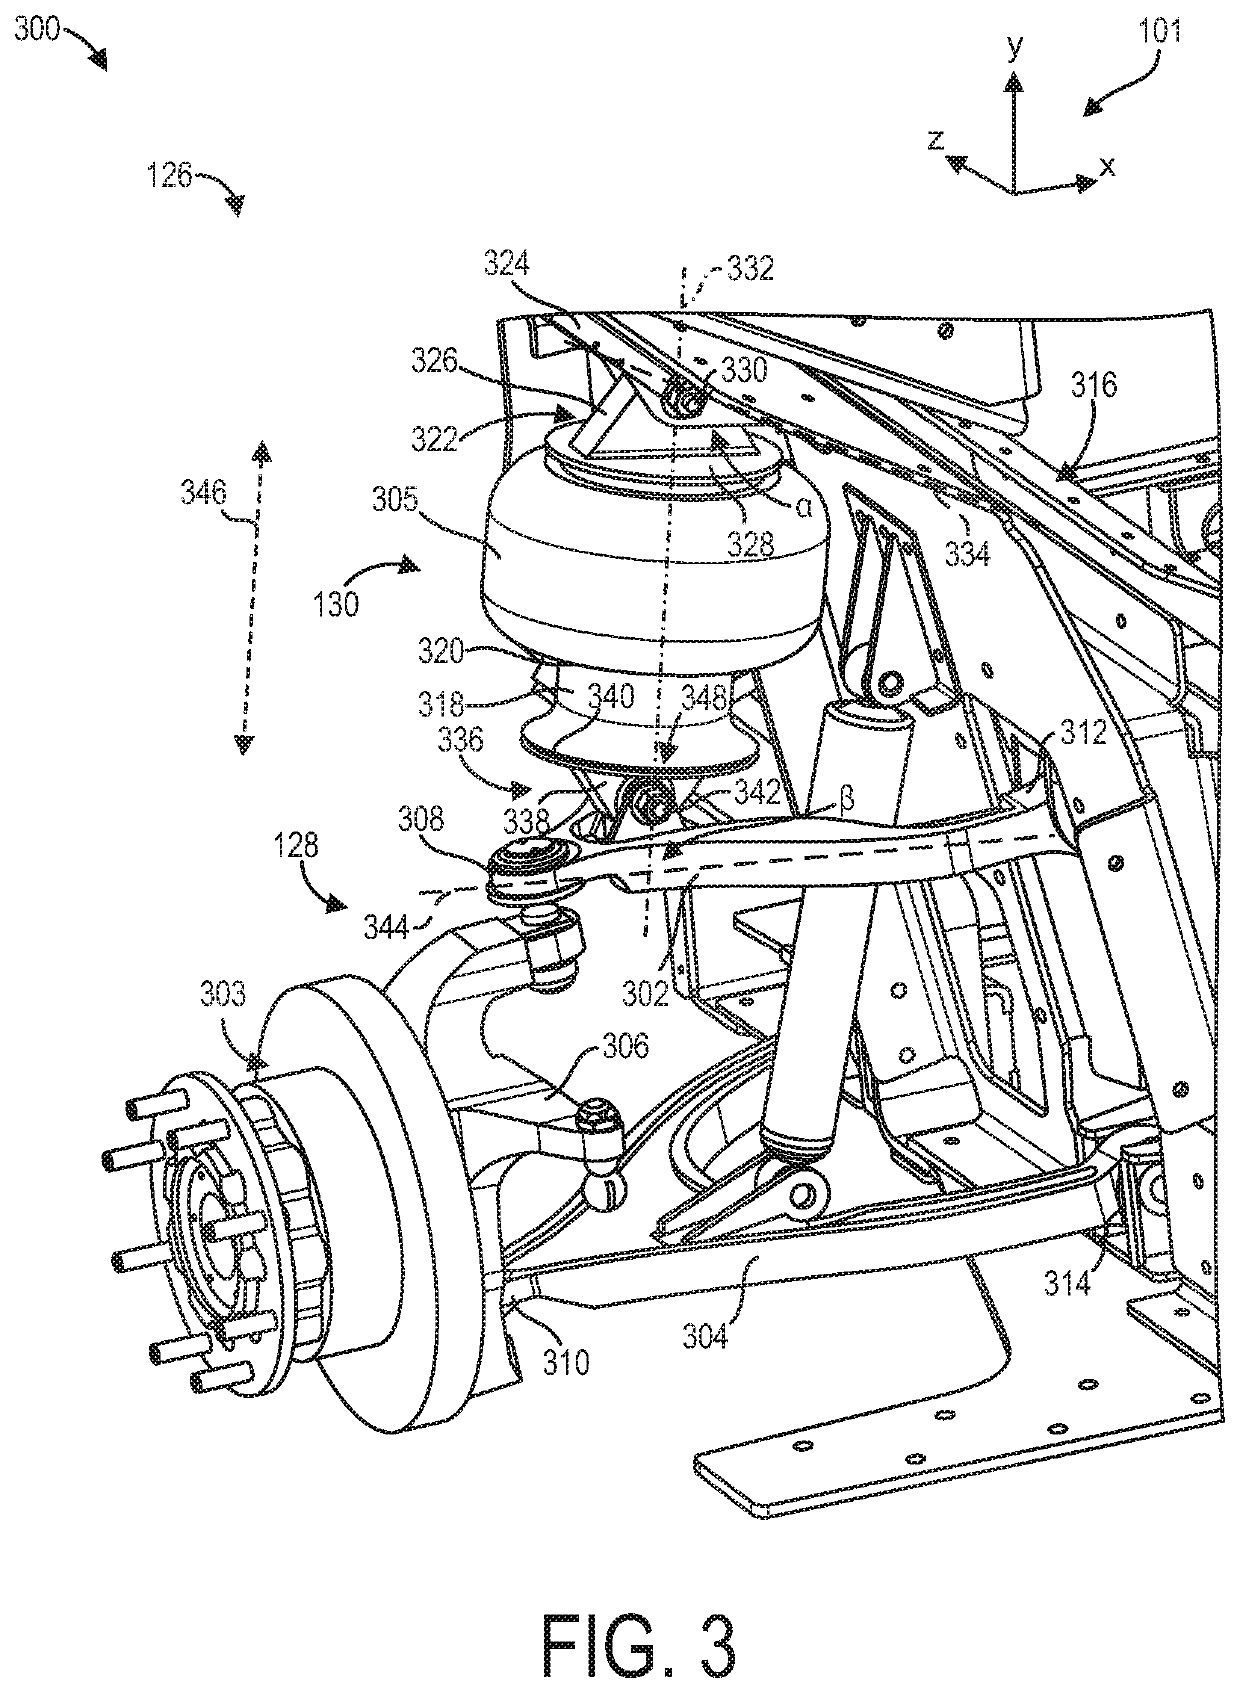 Suspension system for electric heavy-duty vehicle